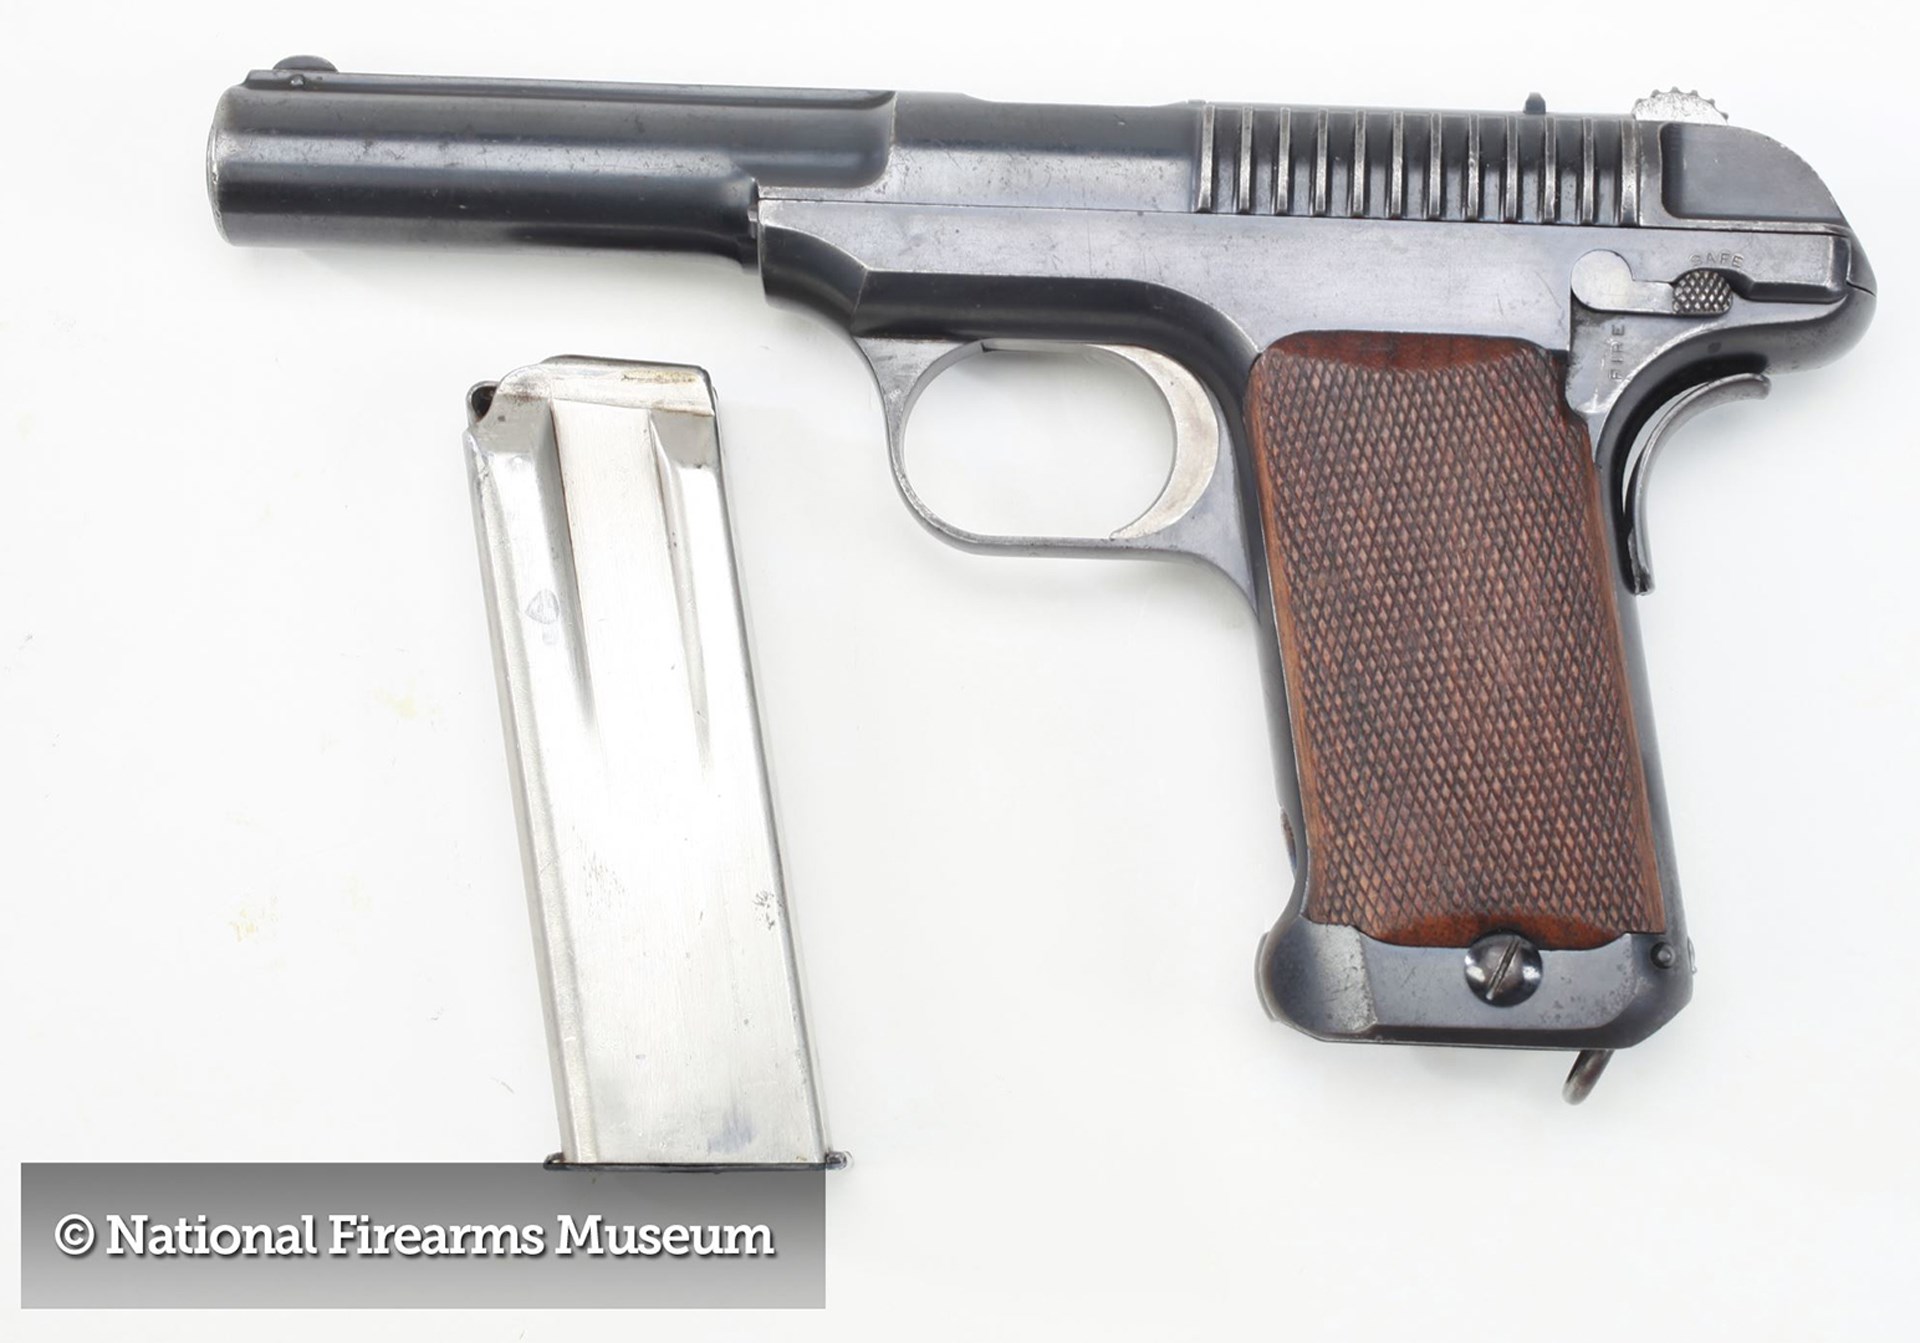 An original Savage trial pistol in .45 ACP left-side view gun metal magazine text on image noting copyright national firearms museum